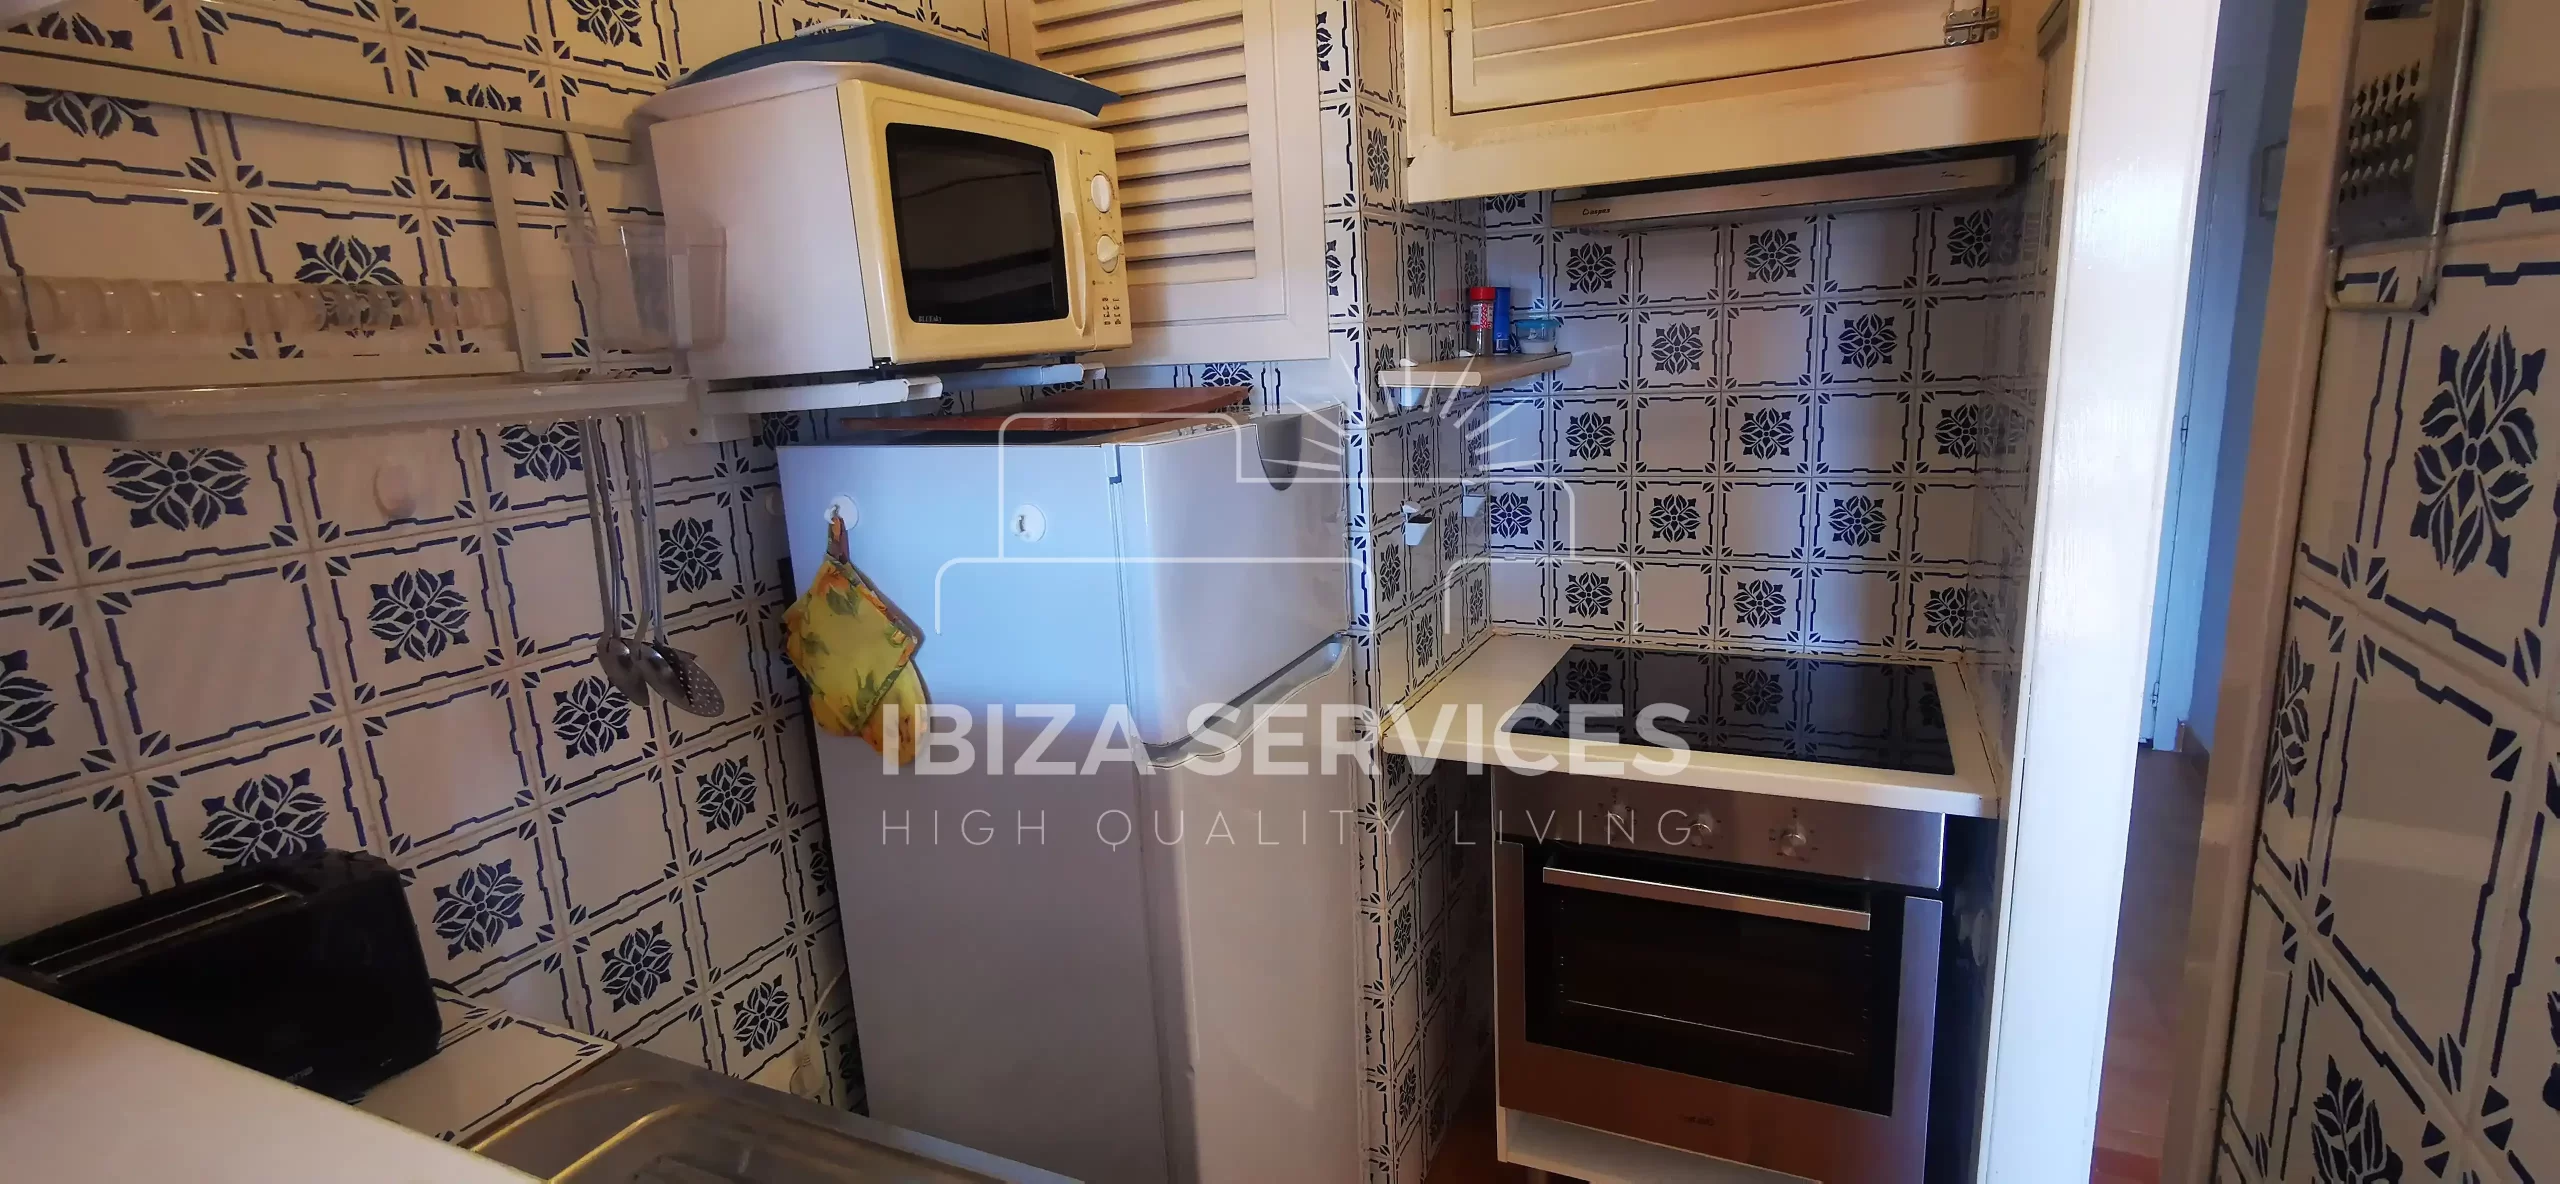 For Sale: Seaside holiday apartment in Cala Coral, Ibiza